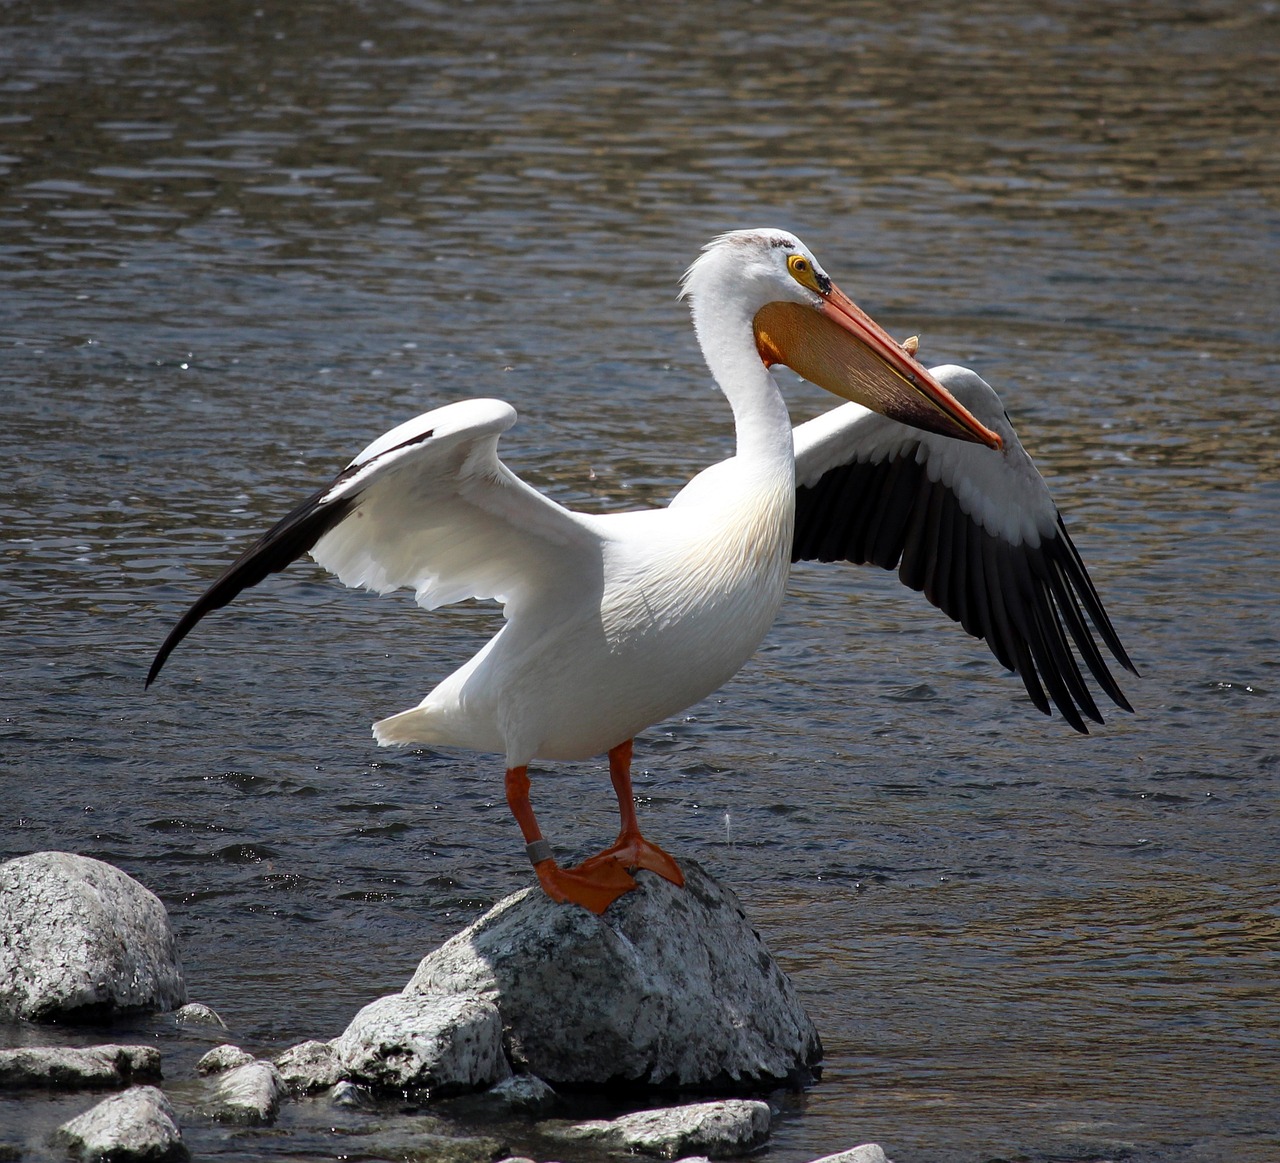 a pelican standing on a rock in the water, arabesque, idaho, arms extended, on a riverbank, with large wings